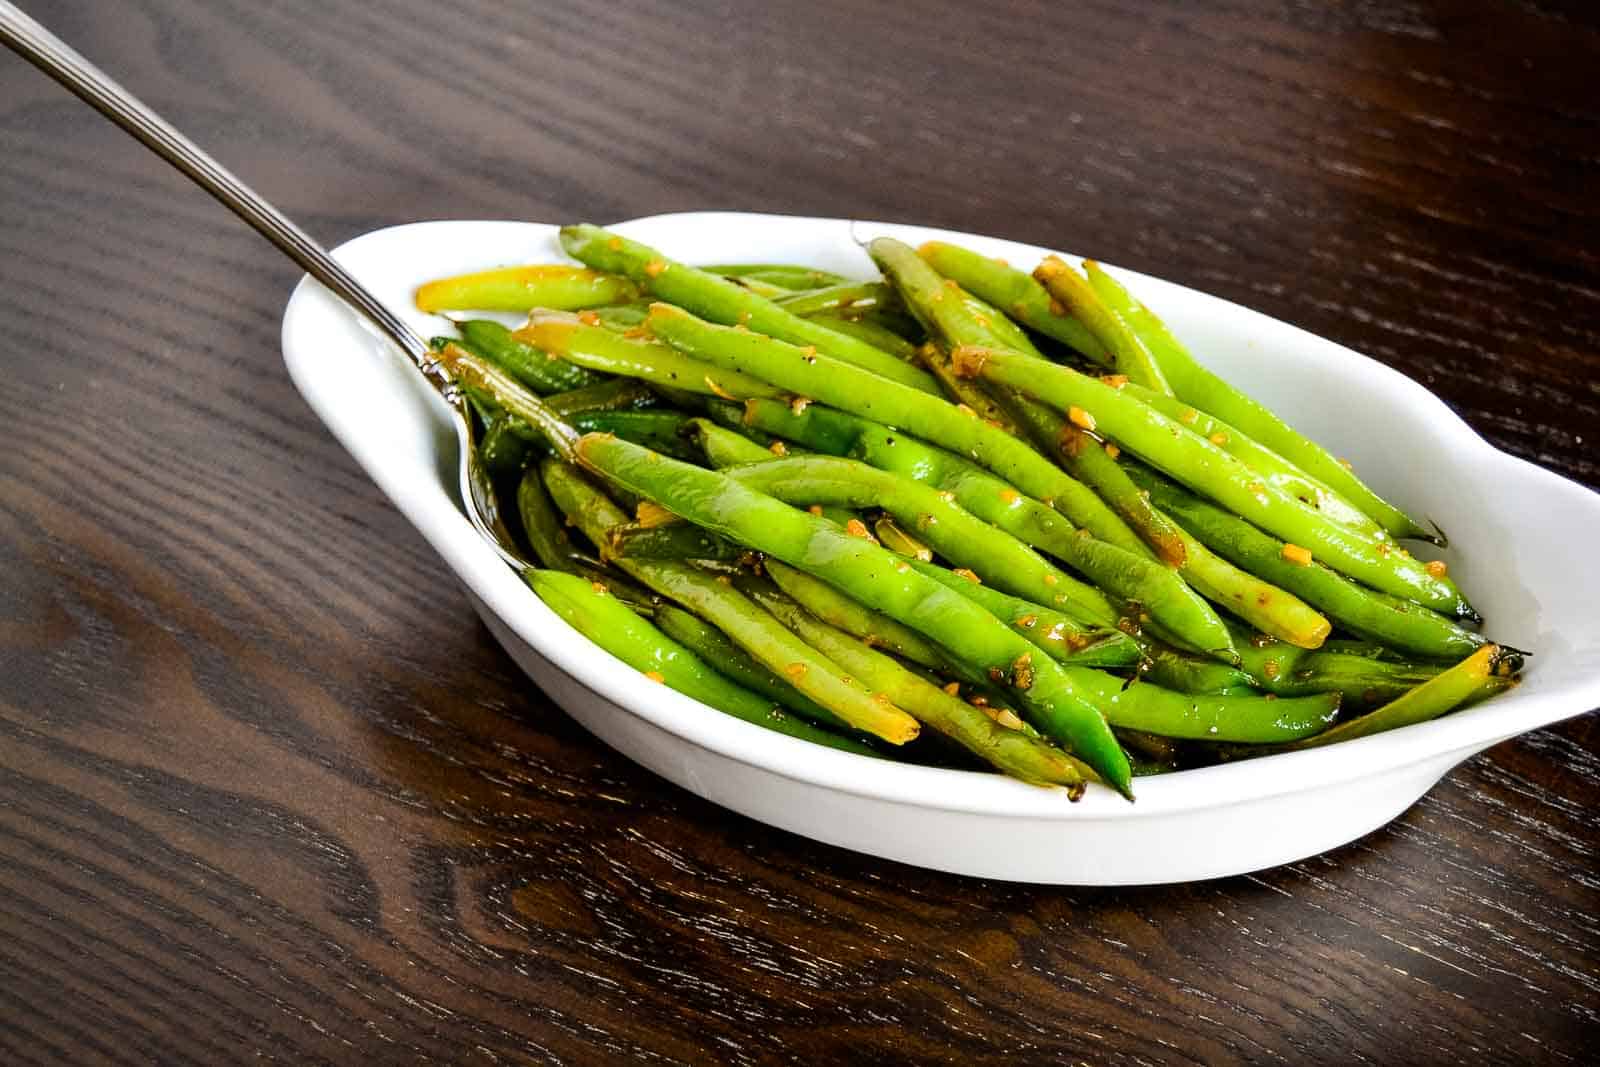 Screaming skillet green beans in a white bowl on a wooden table.